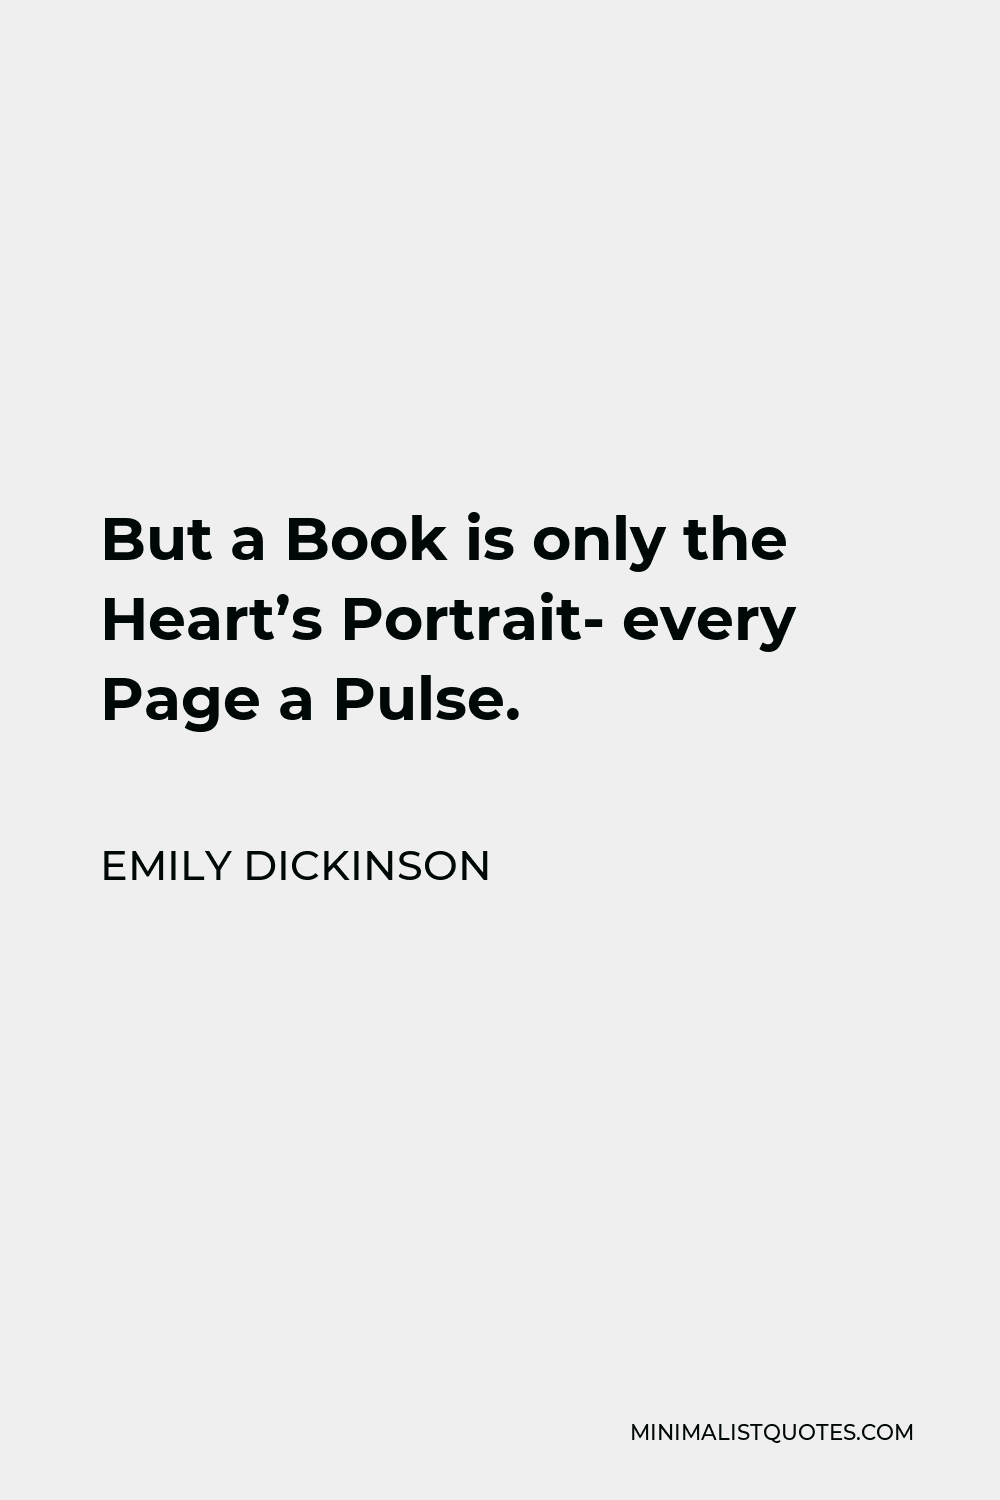 Emily Dickinson Quote - But a Book is only the Heart’s Portrait- every Page a Pulse.